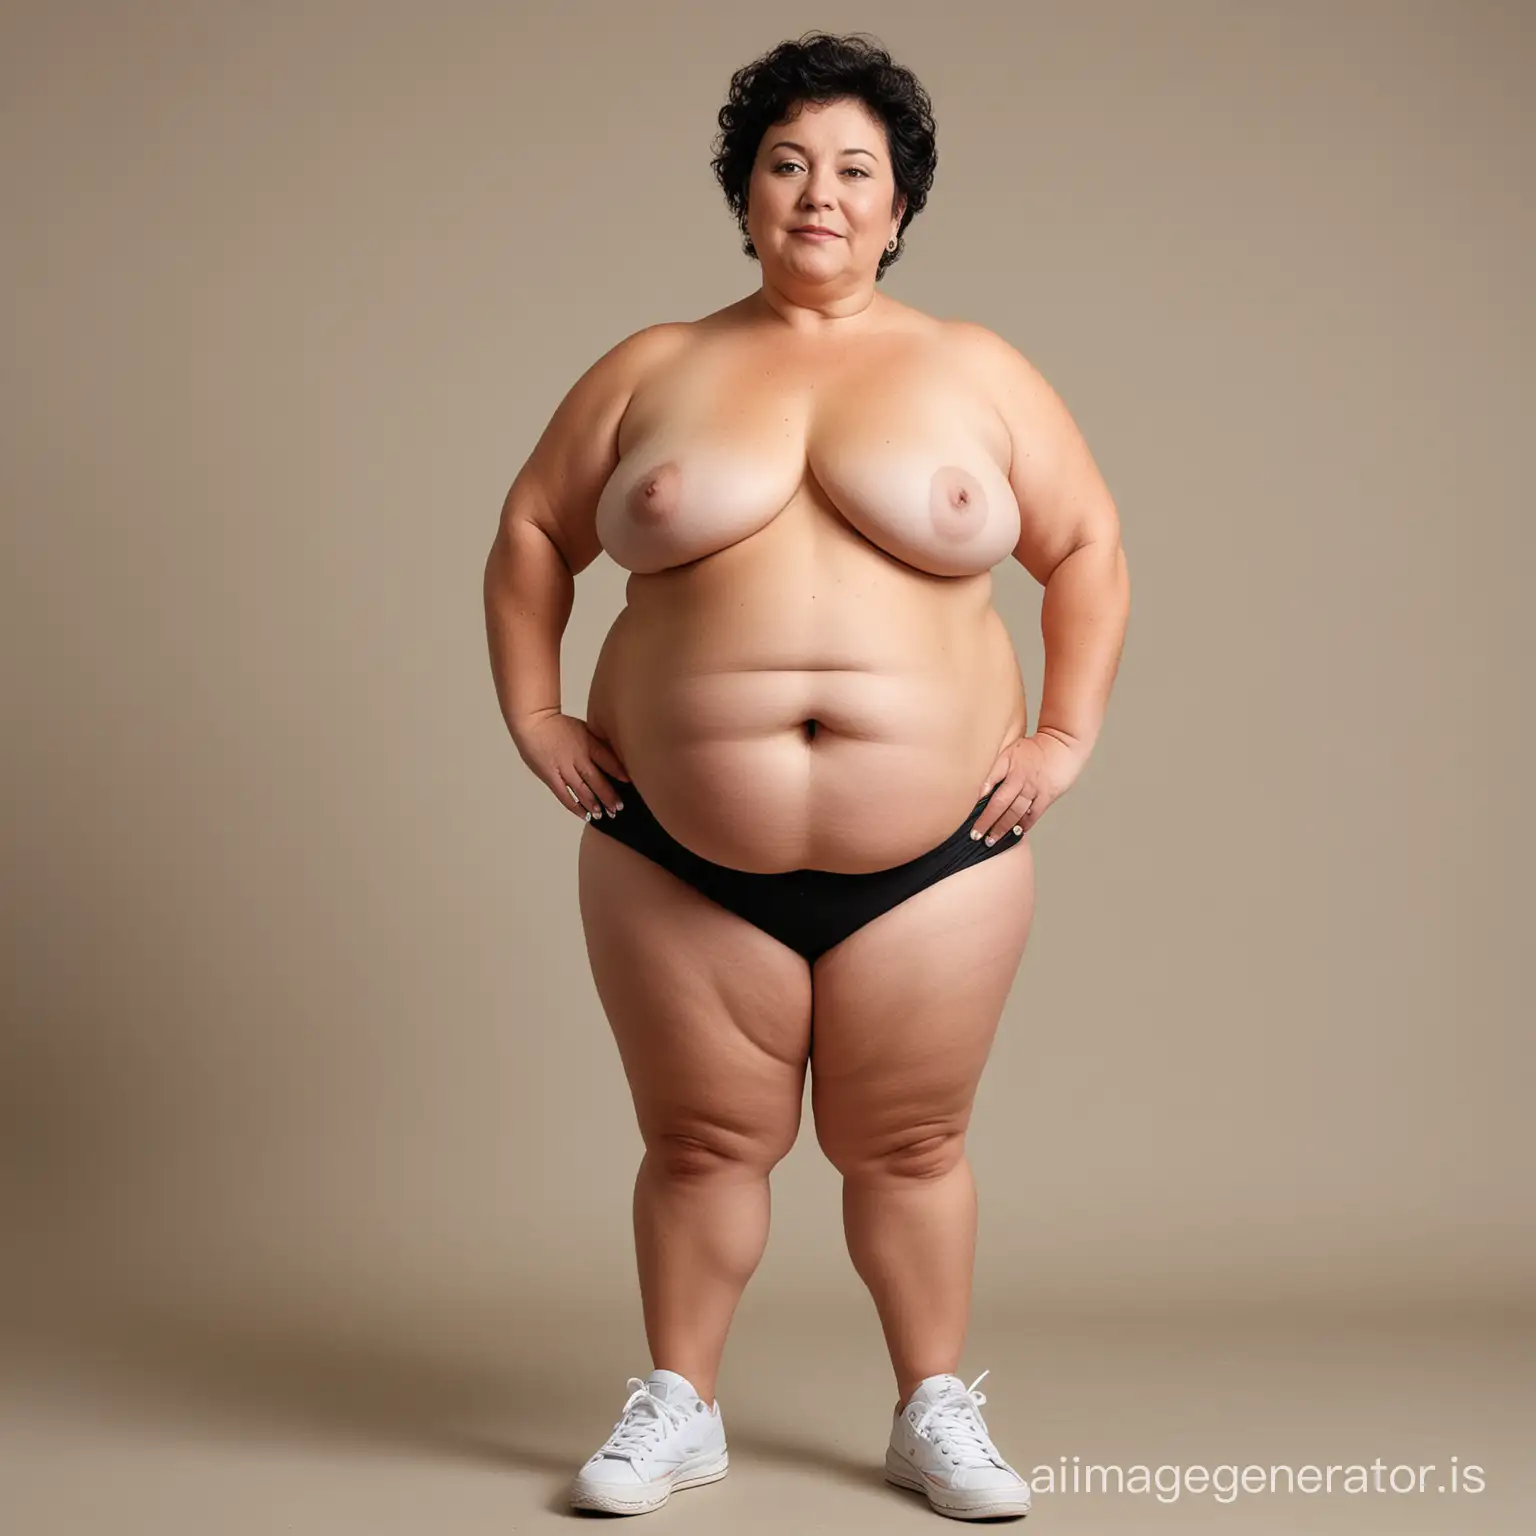 Elderly-Woman-with-Curves-Wearing-Sneakers